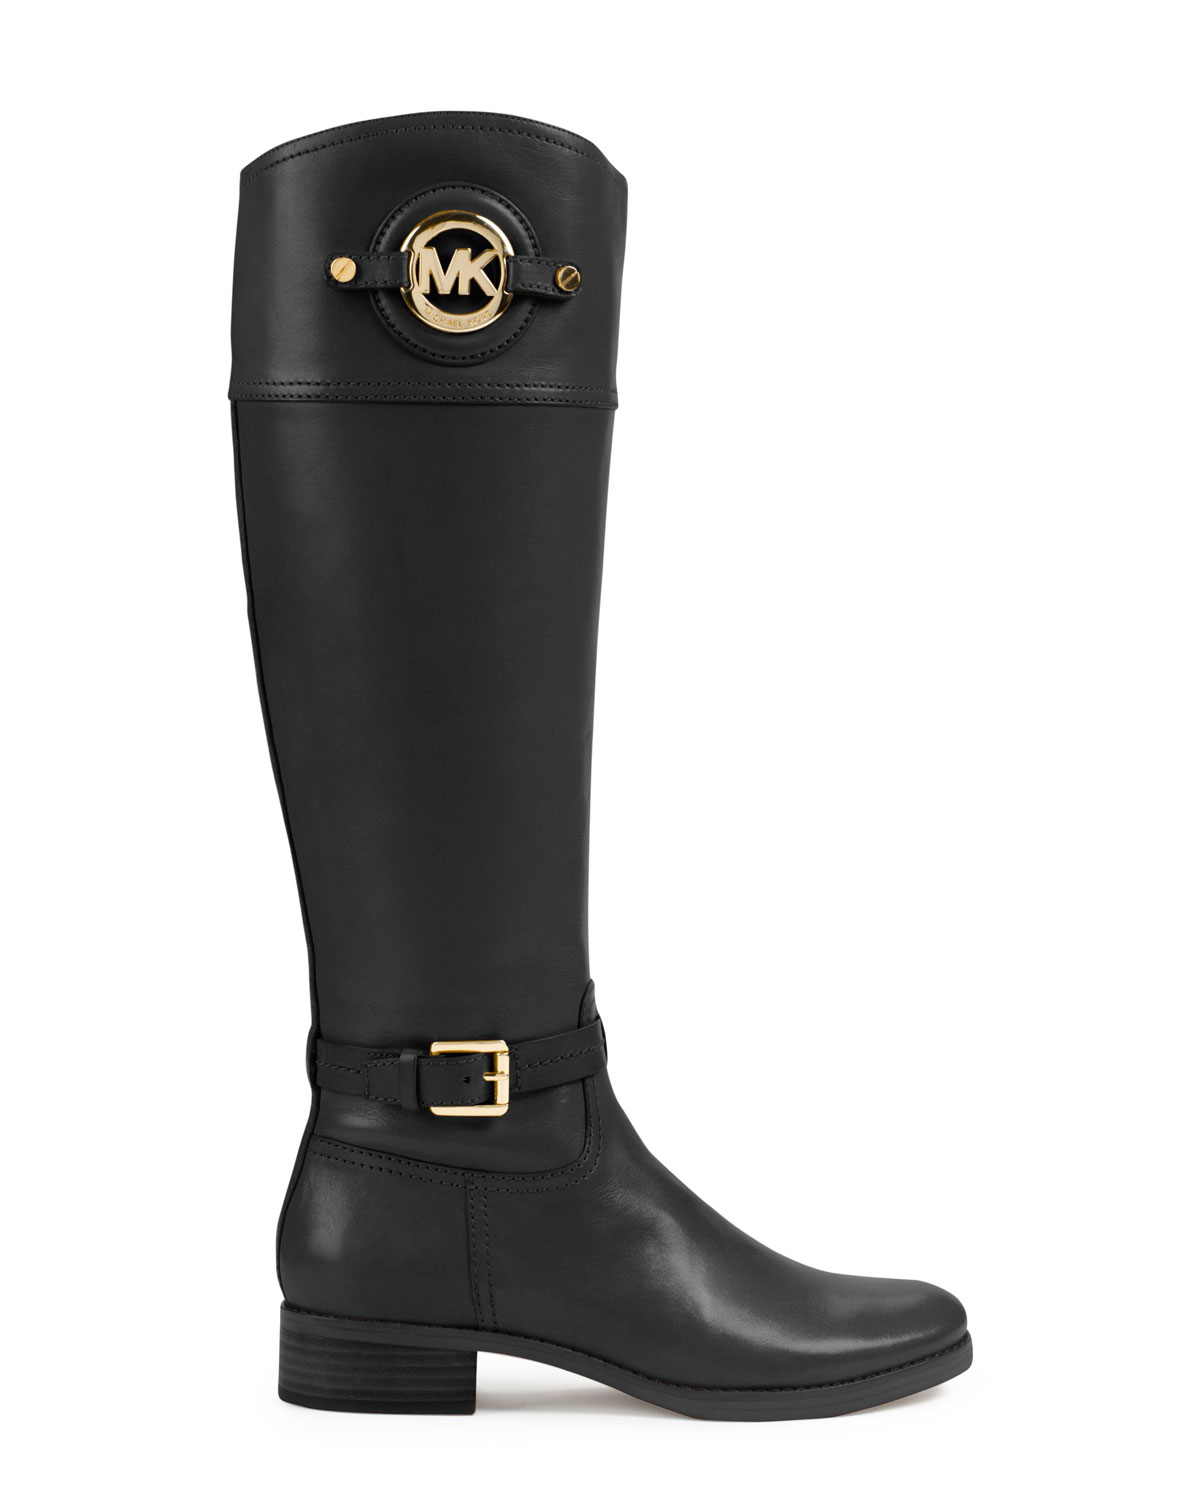 Lyst - Michael Kors Michael Stockard Twotone Leather Riding Boot in Black